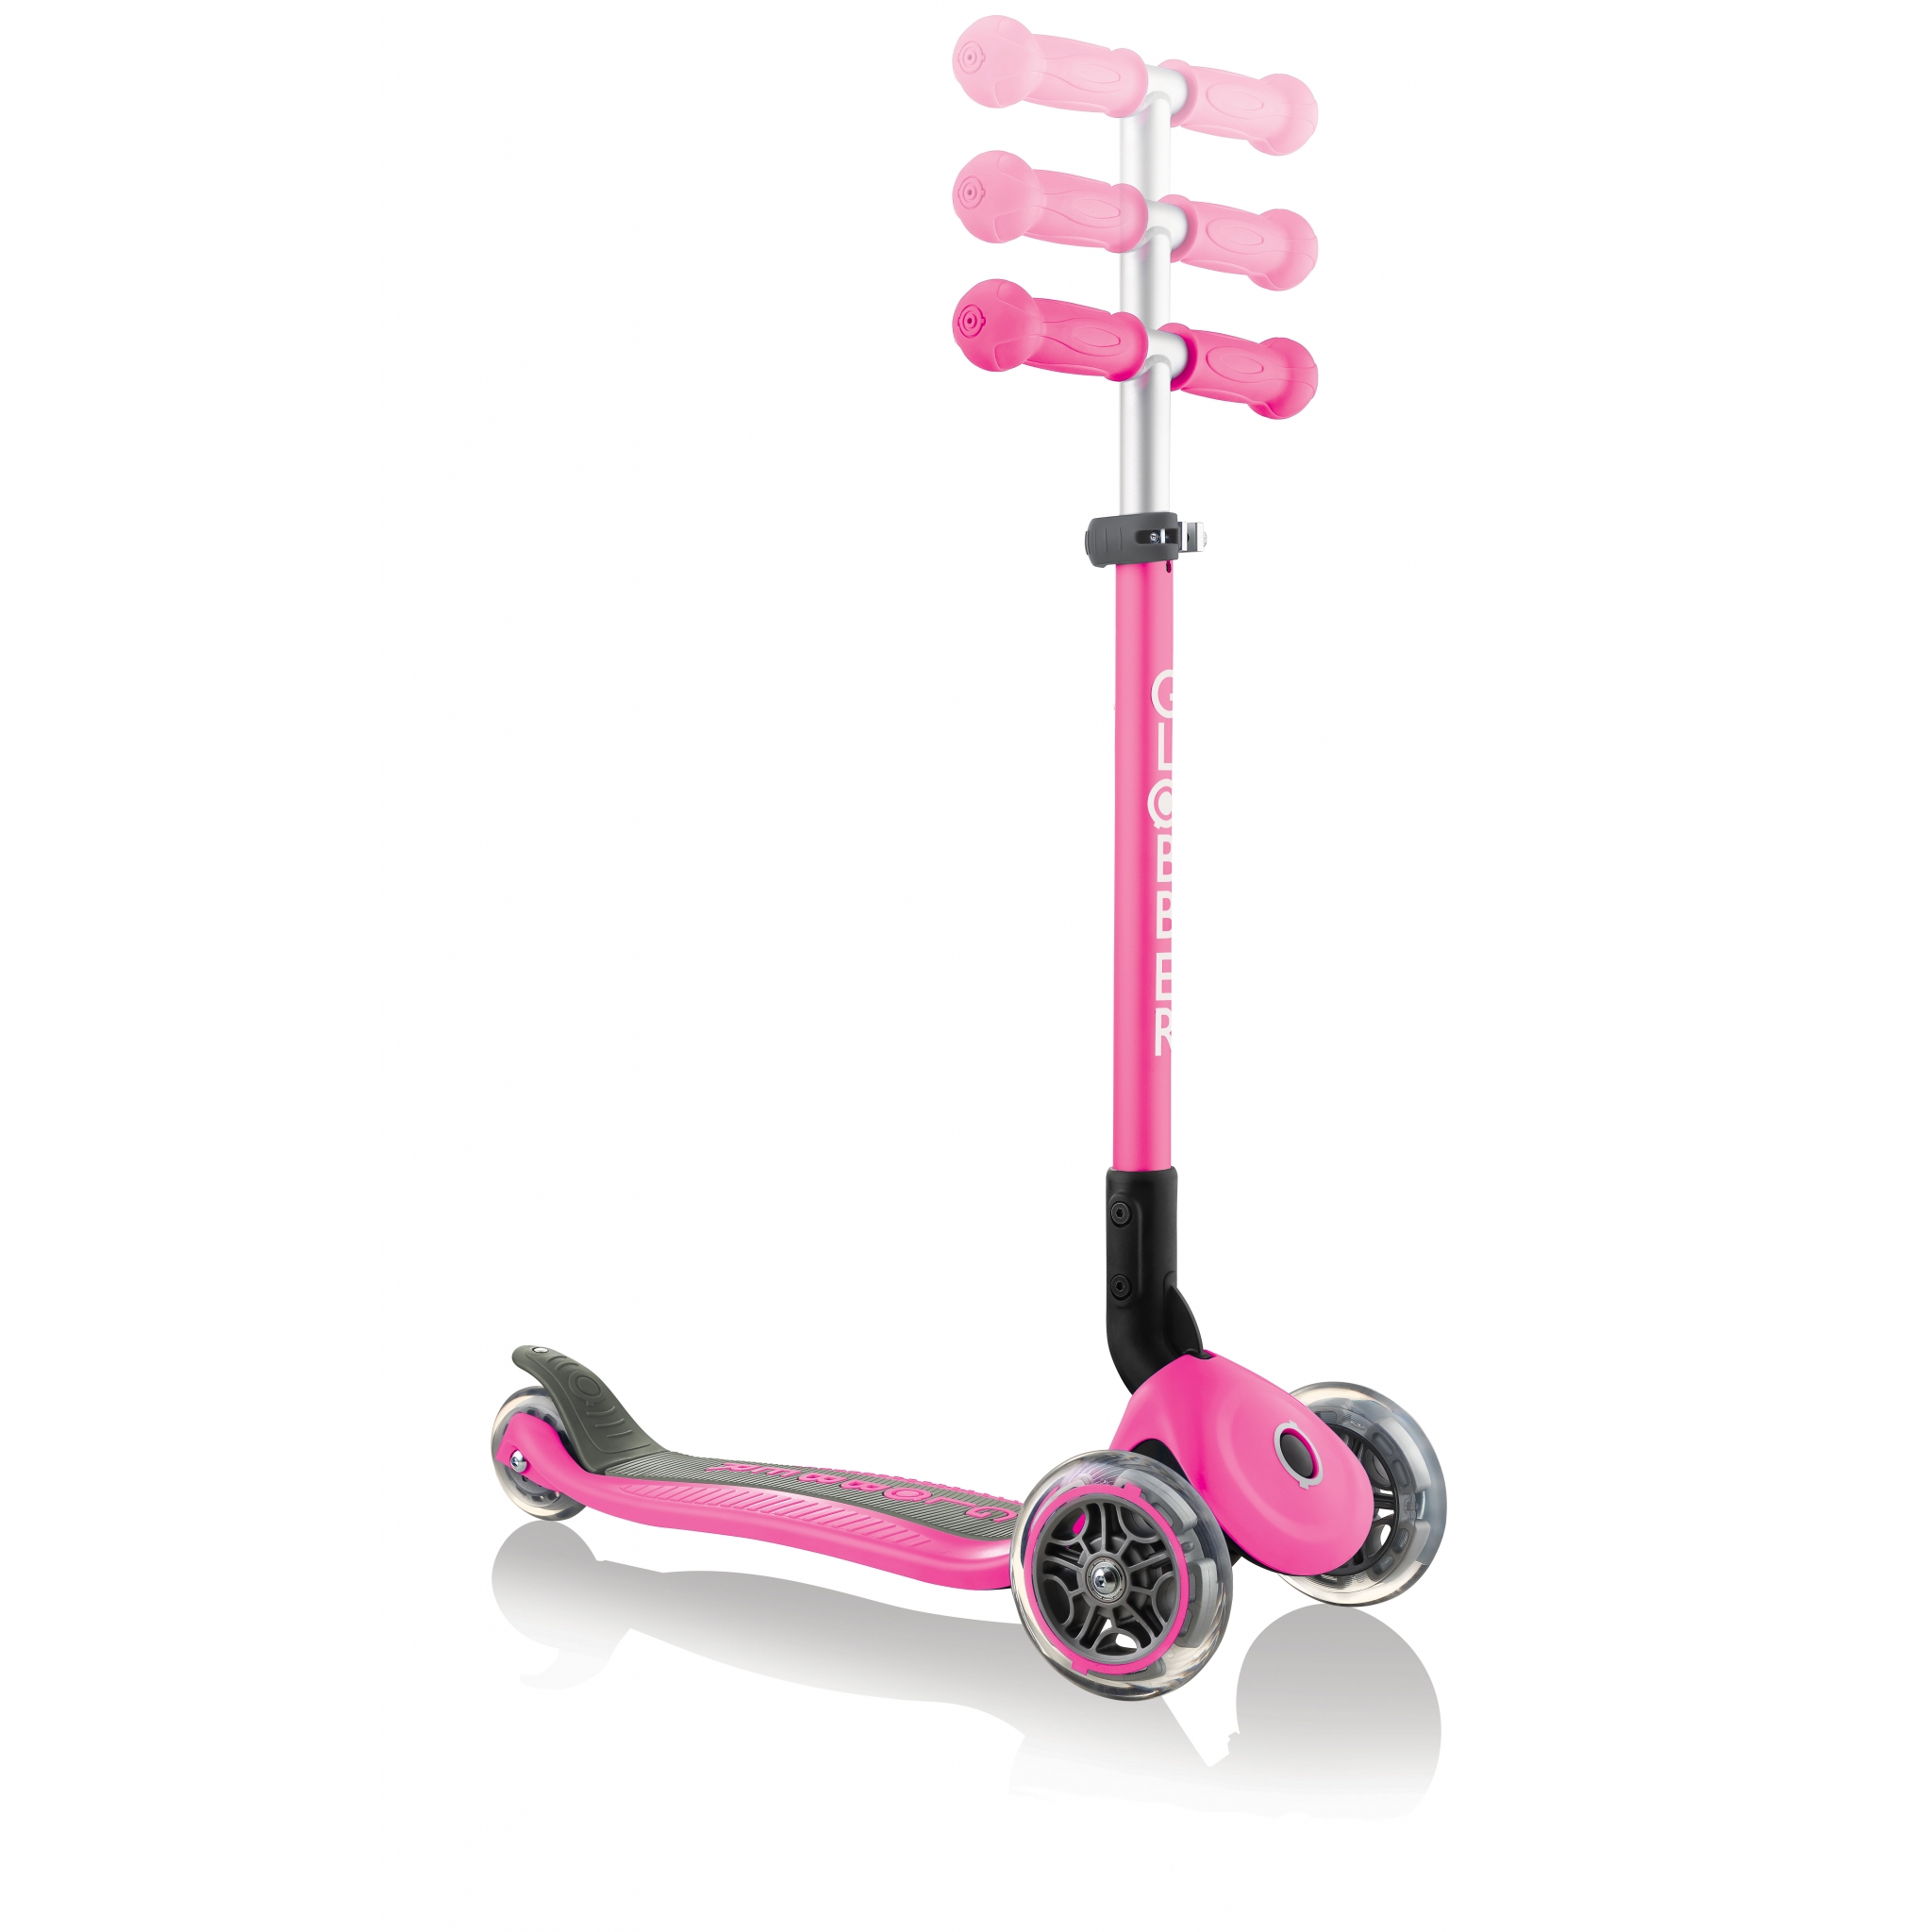 PRIMO-FOLDABLE-adjustable-scooter-for-kids-neon-pink 3